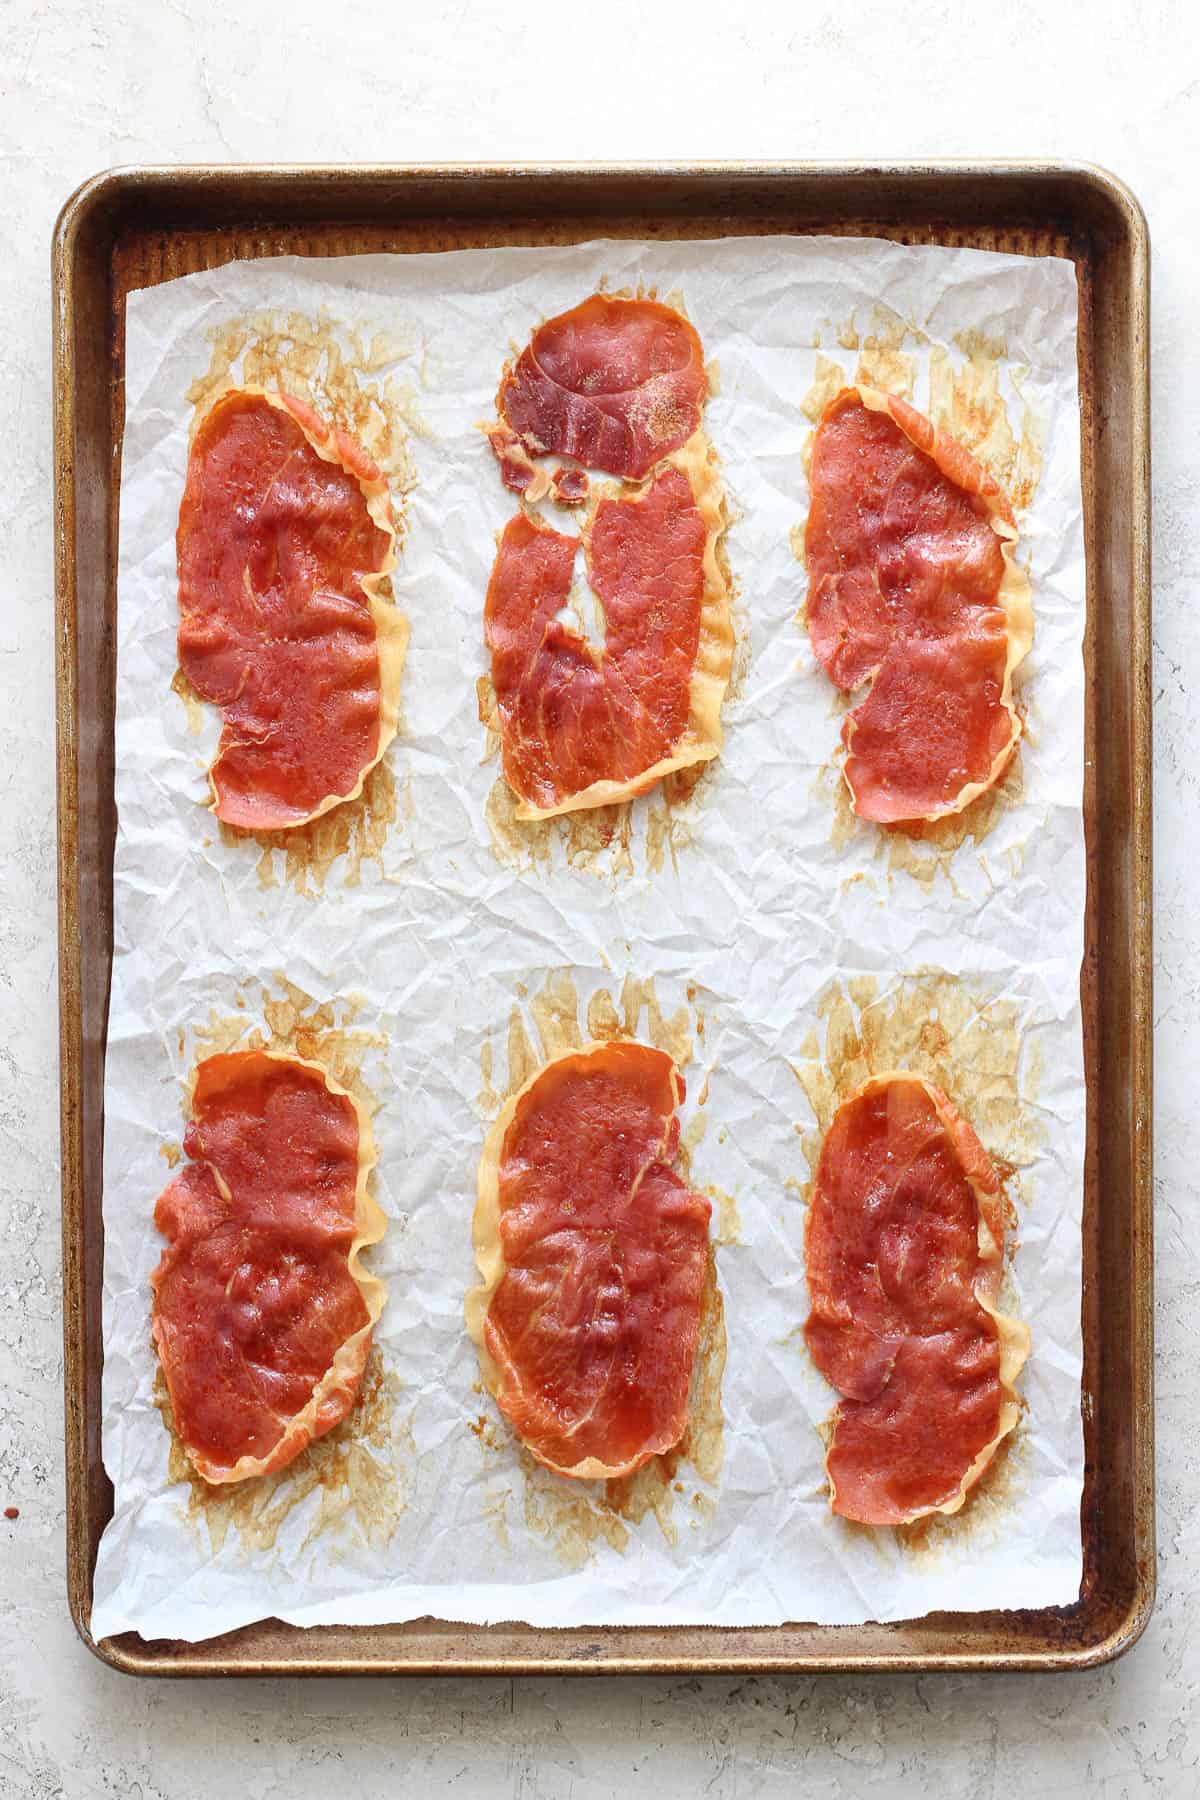 Crispy prosciutto on a baking sheet after being cooked.